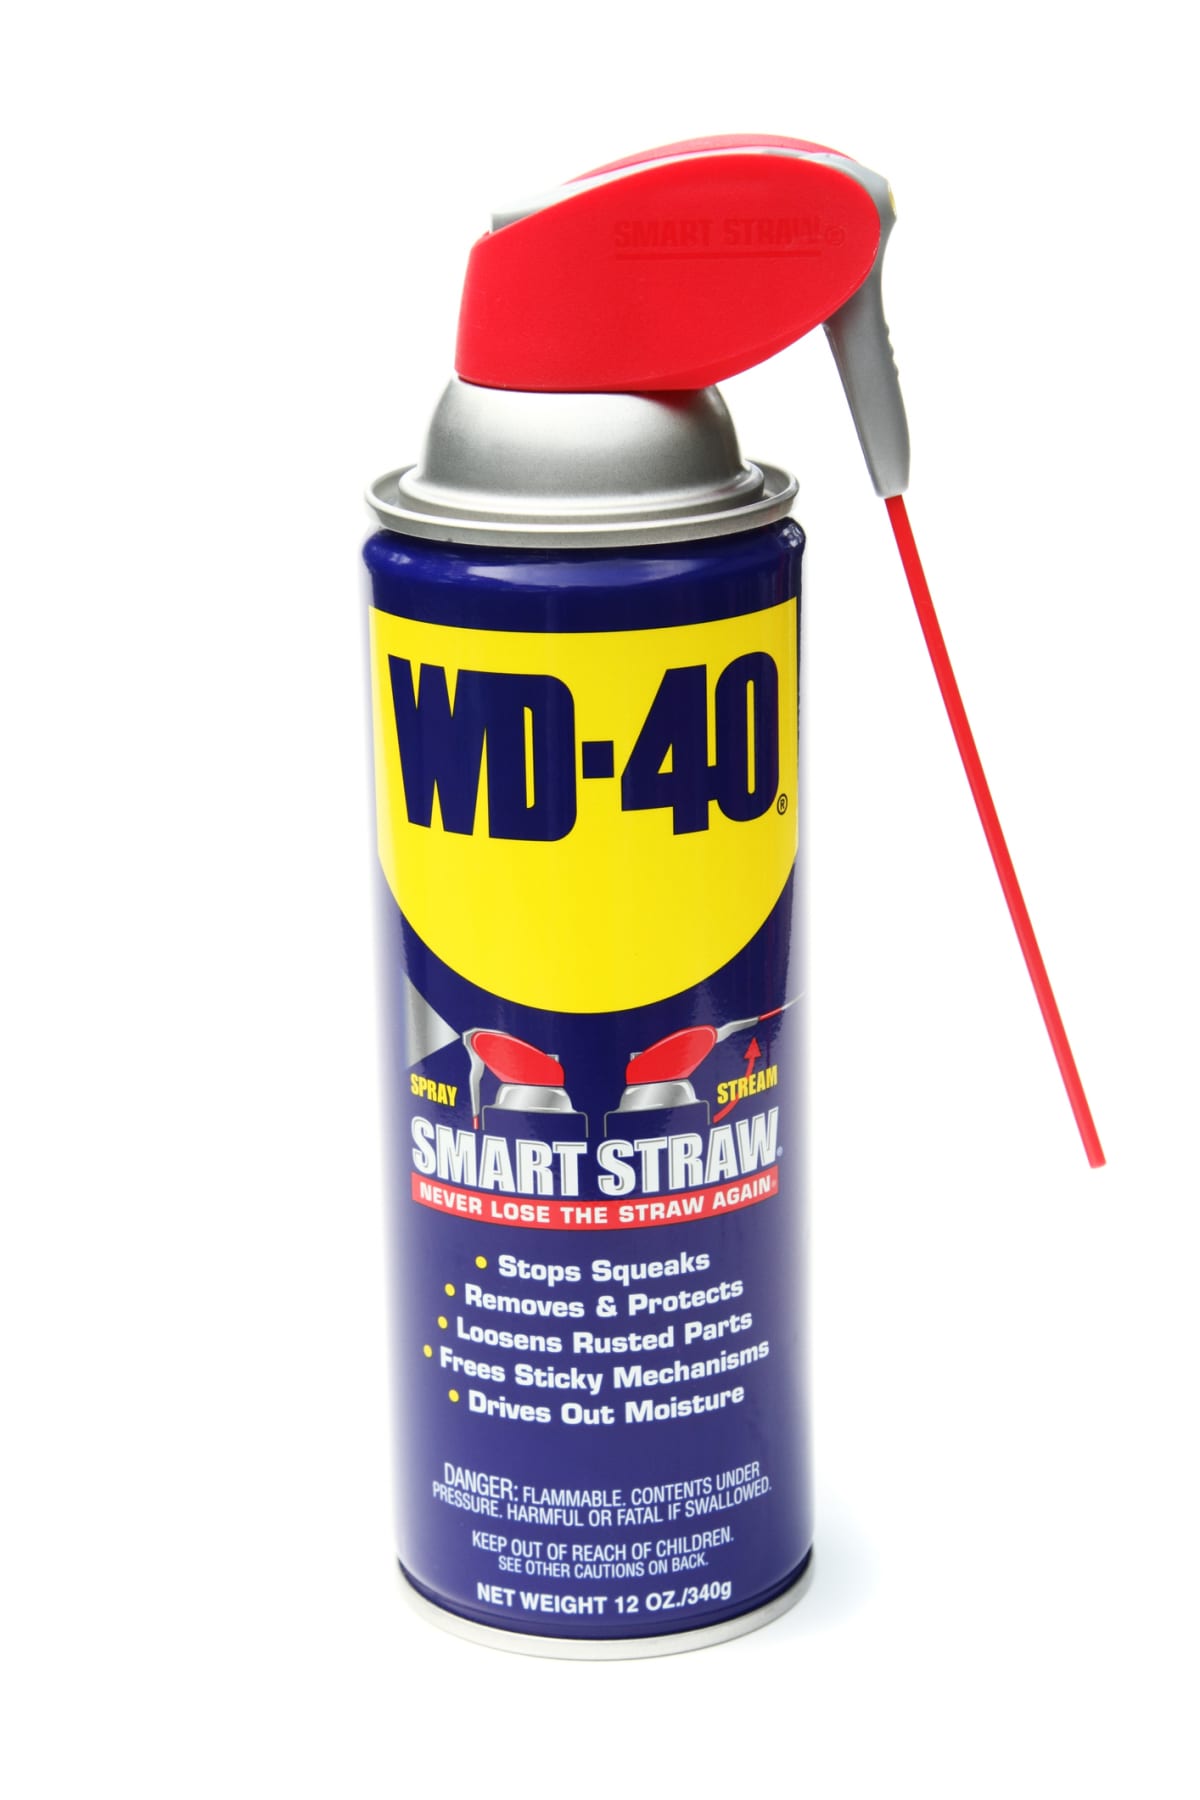 A spray can of WD-40